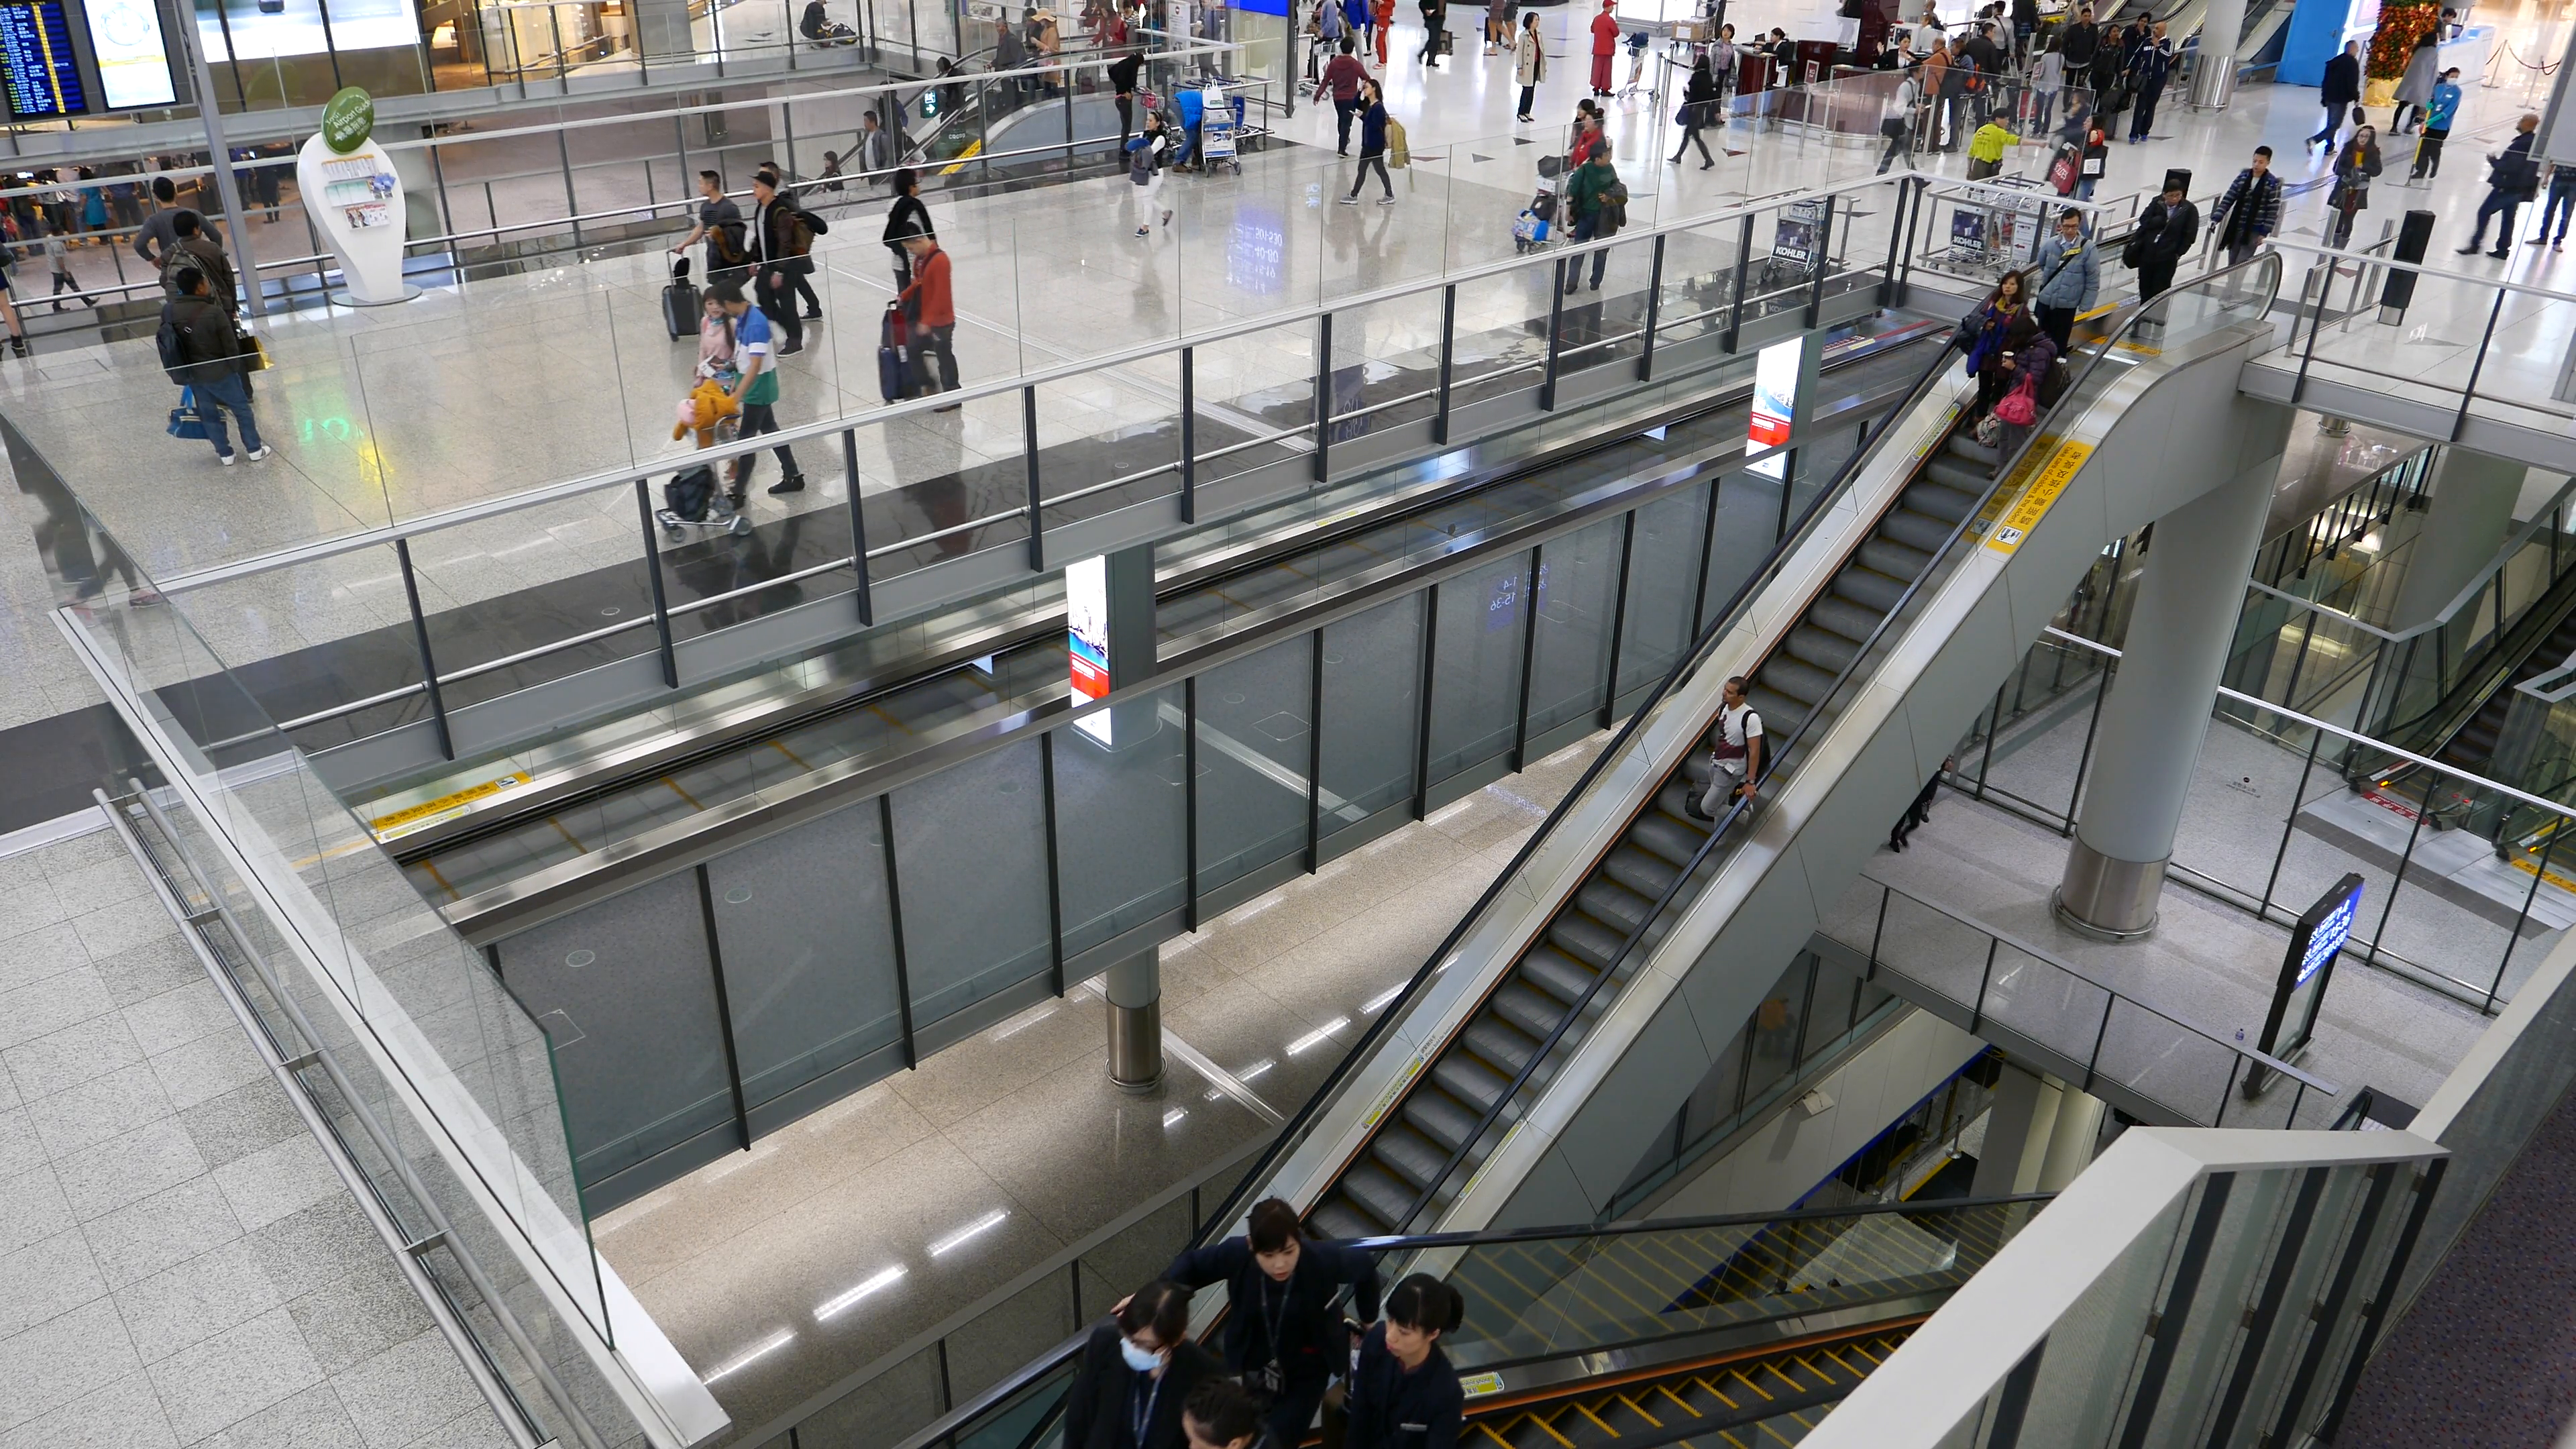 Escalator at airport top down view Stock Video Footage - Videoblocks